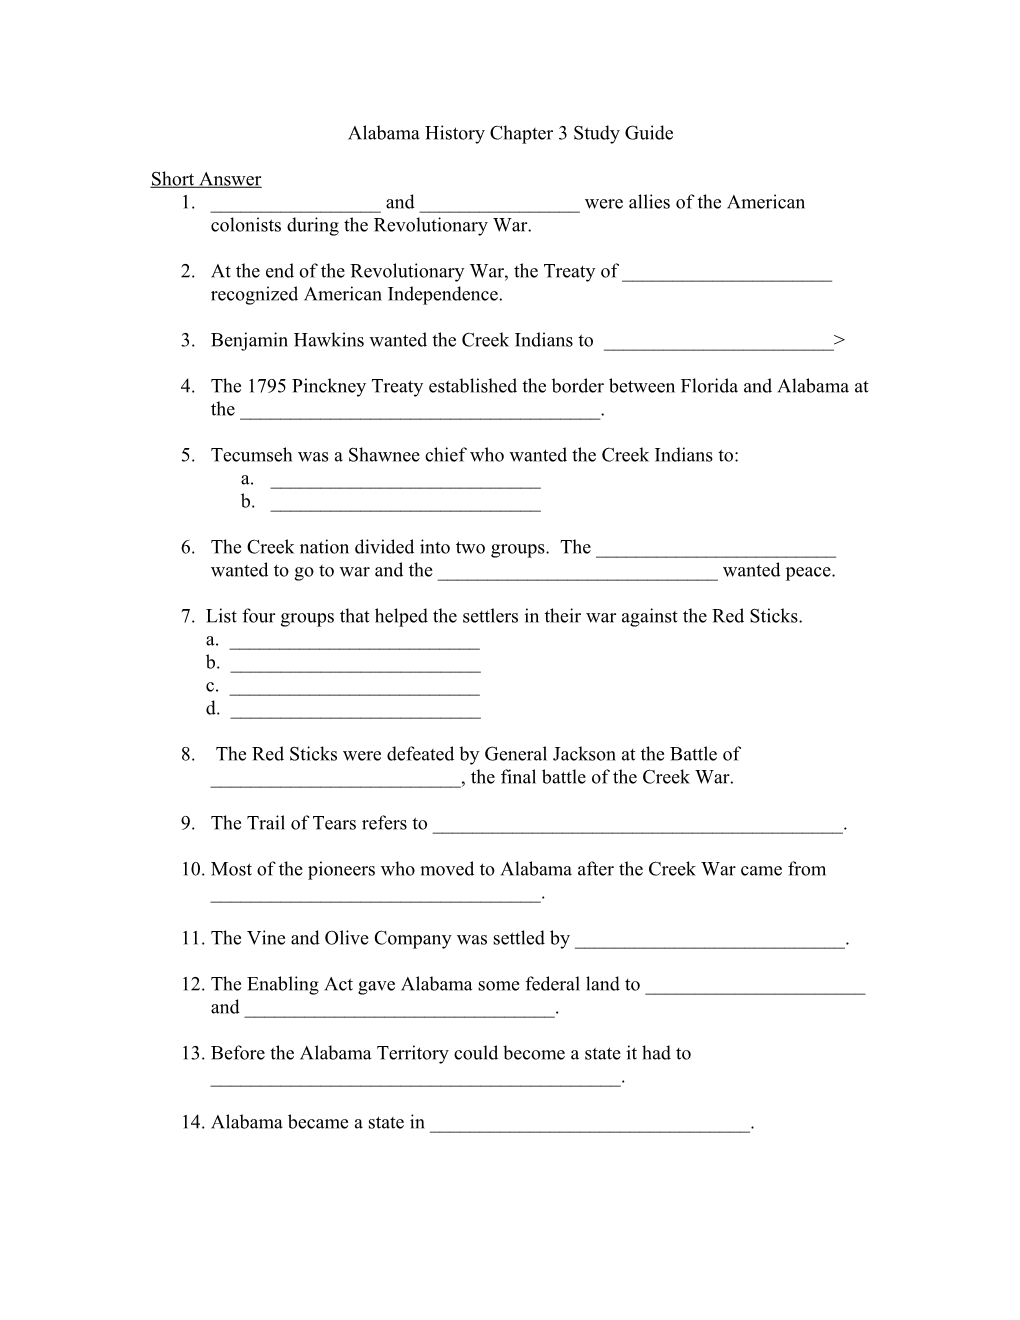 Alabama History Chapter 3 Study Guide